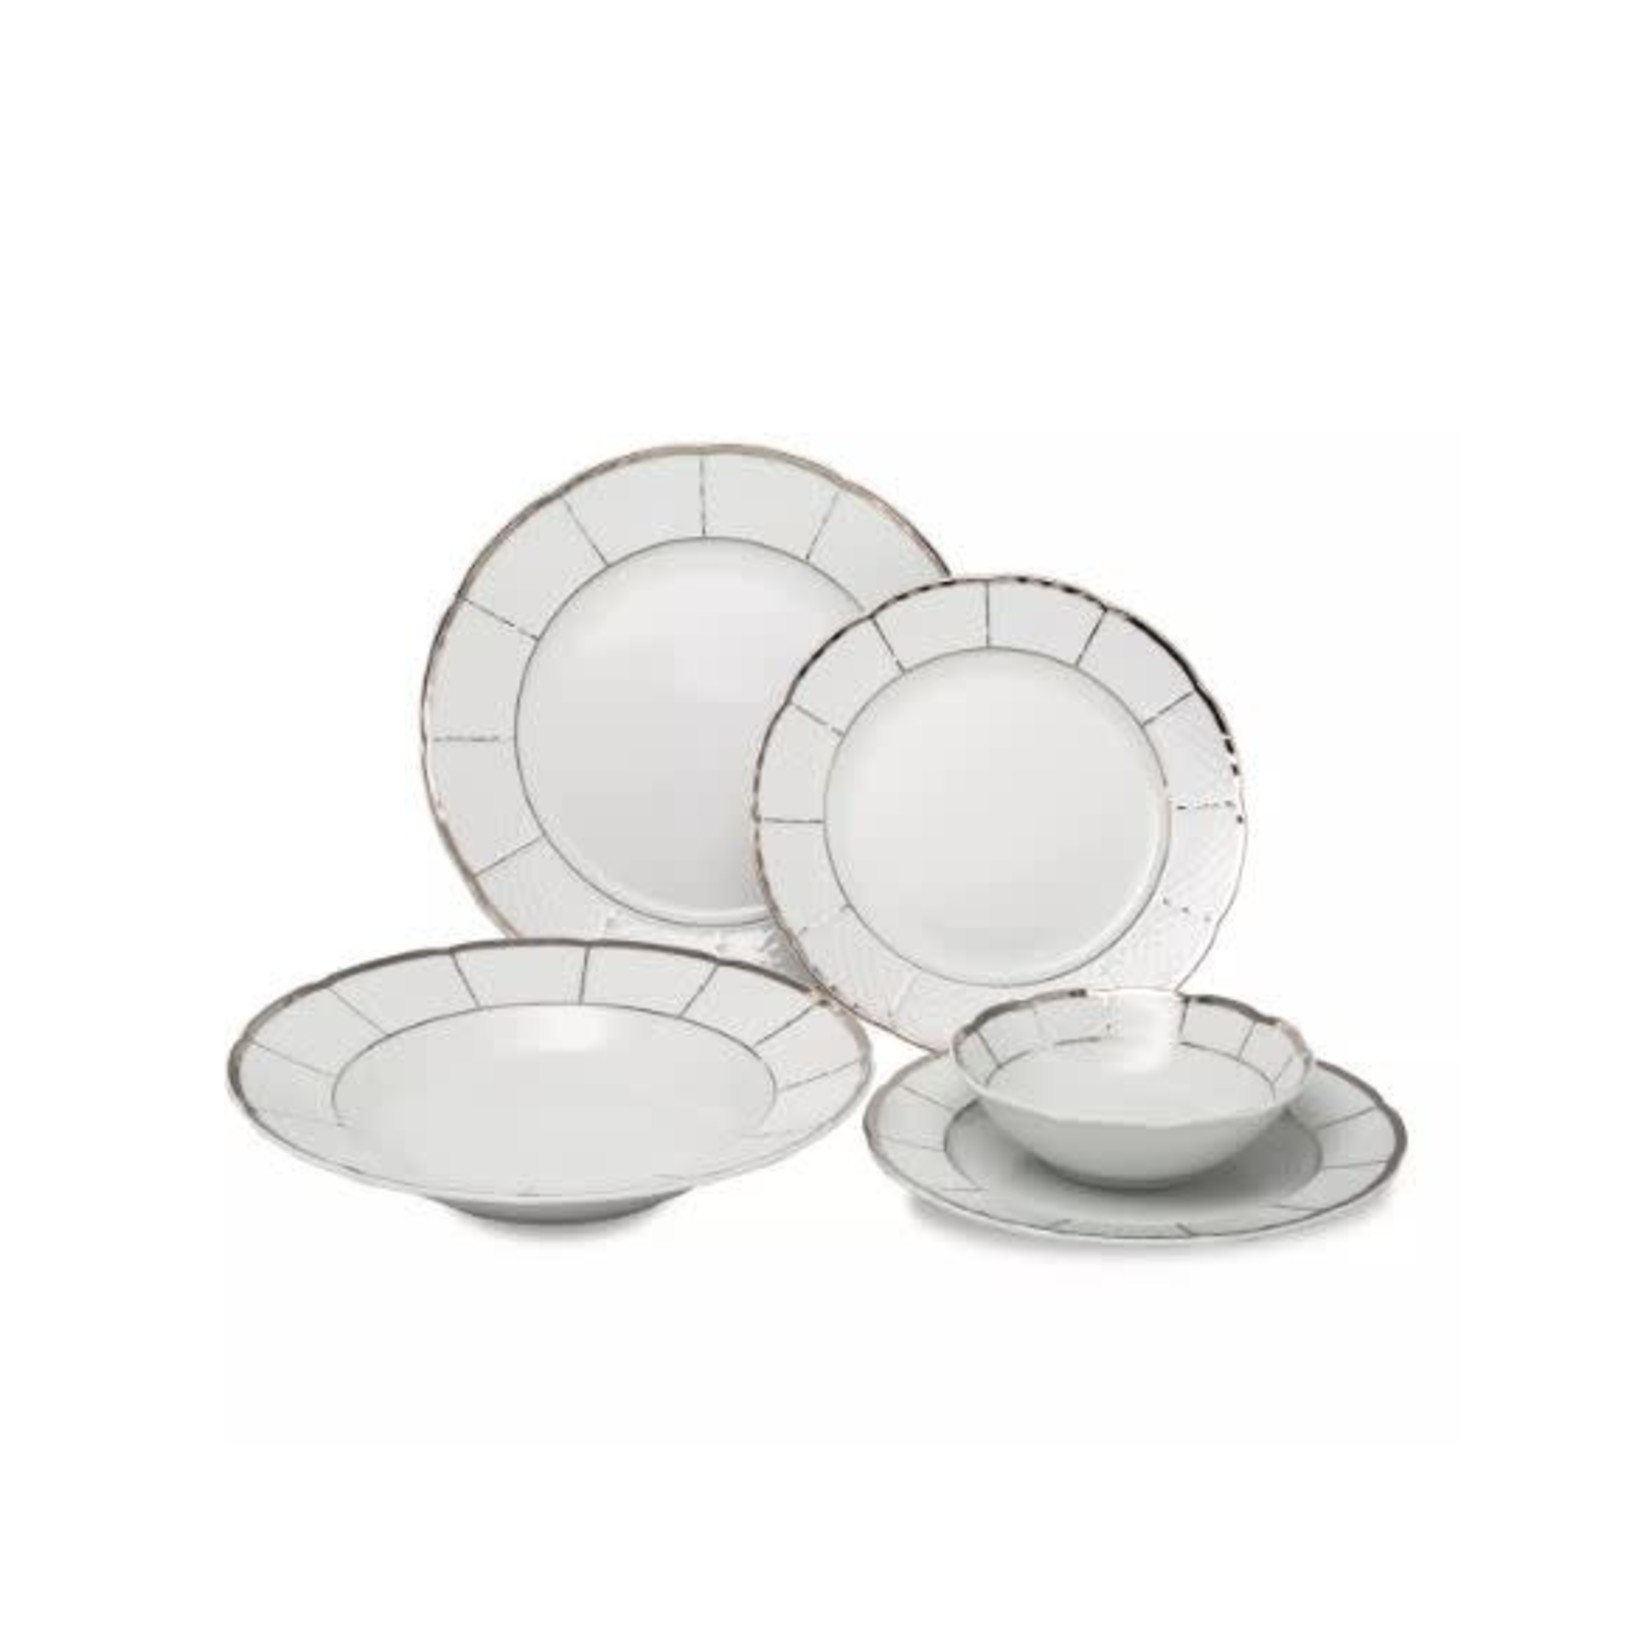 Menuet Silver Service for 4 Service for 12 $360